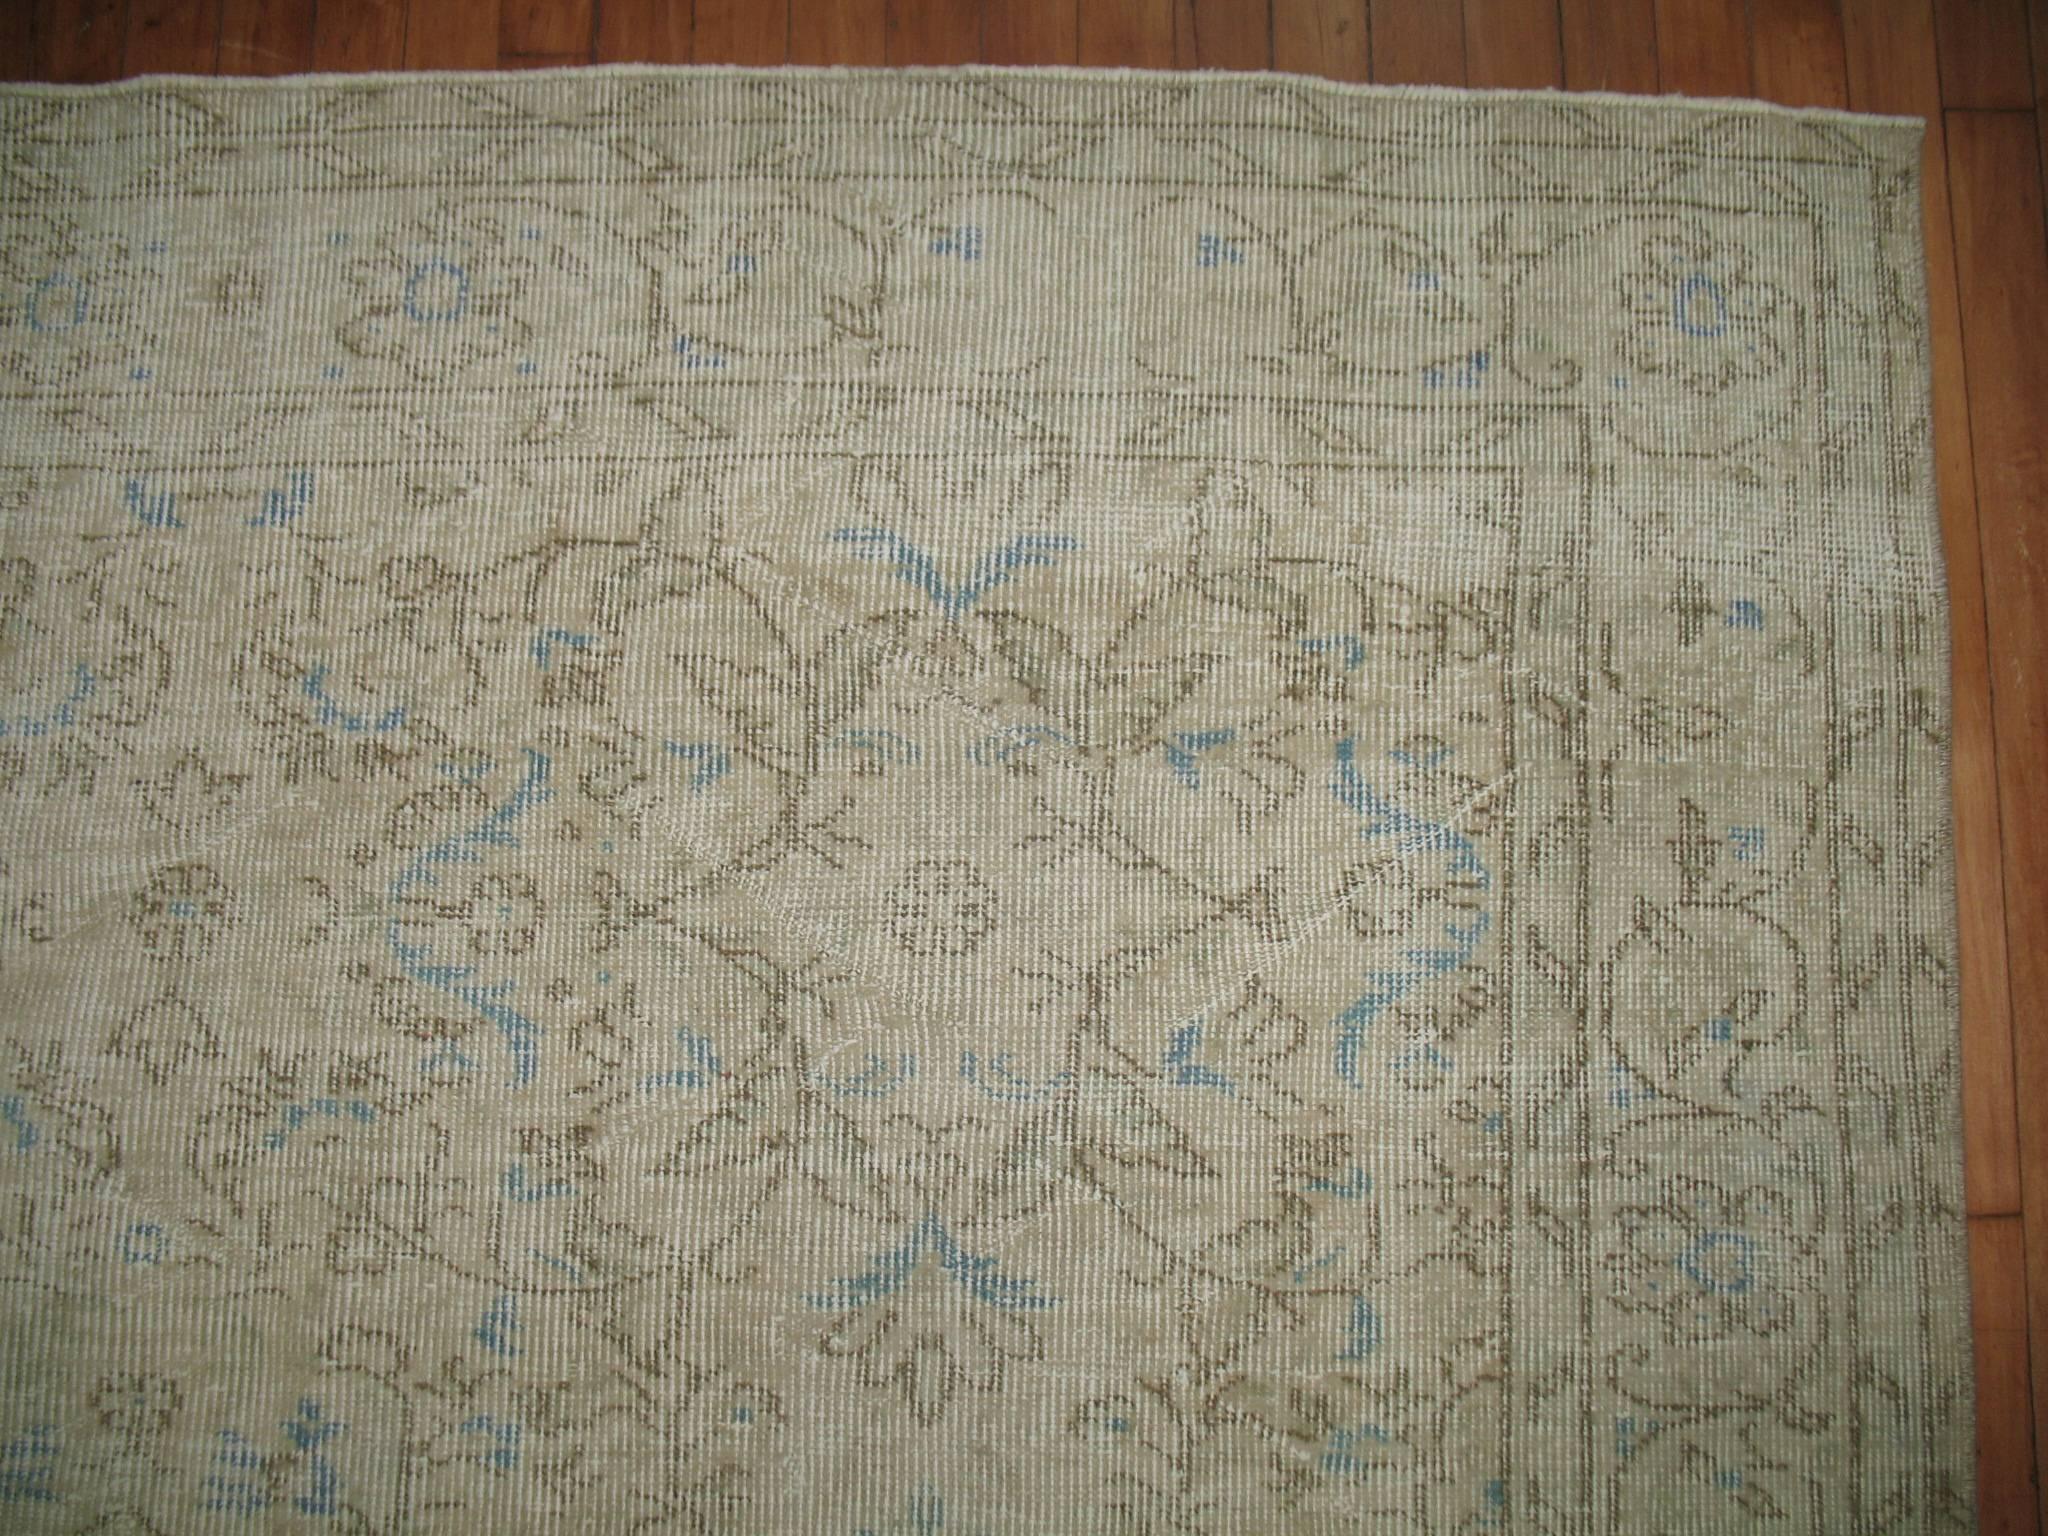 Distressed Small room size one of a kind room Turkish rug with pops of light blue.

Measures: 6'7'' x 10'.